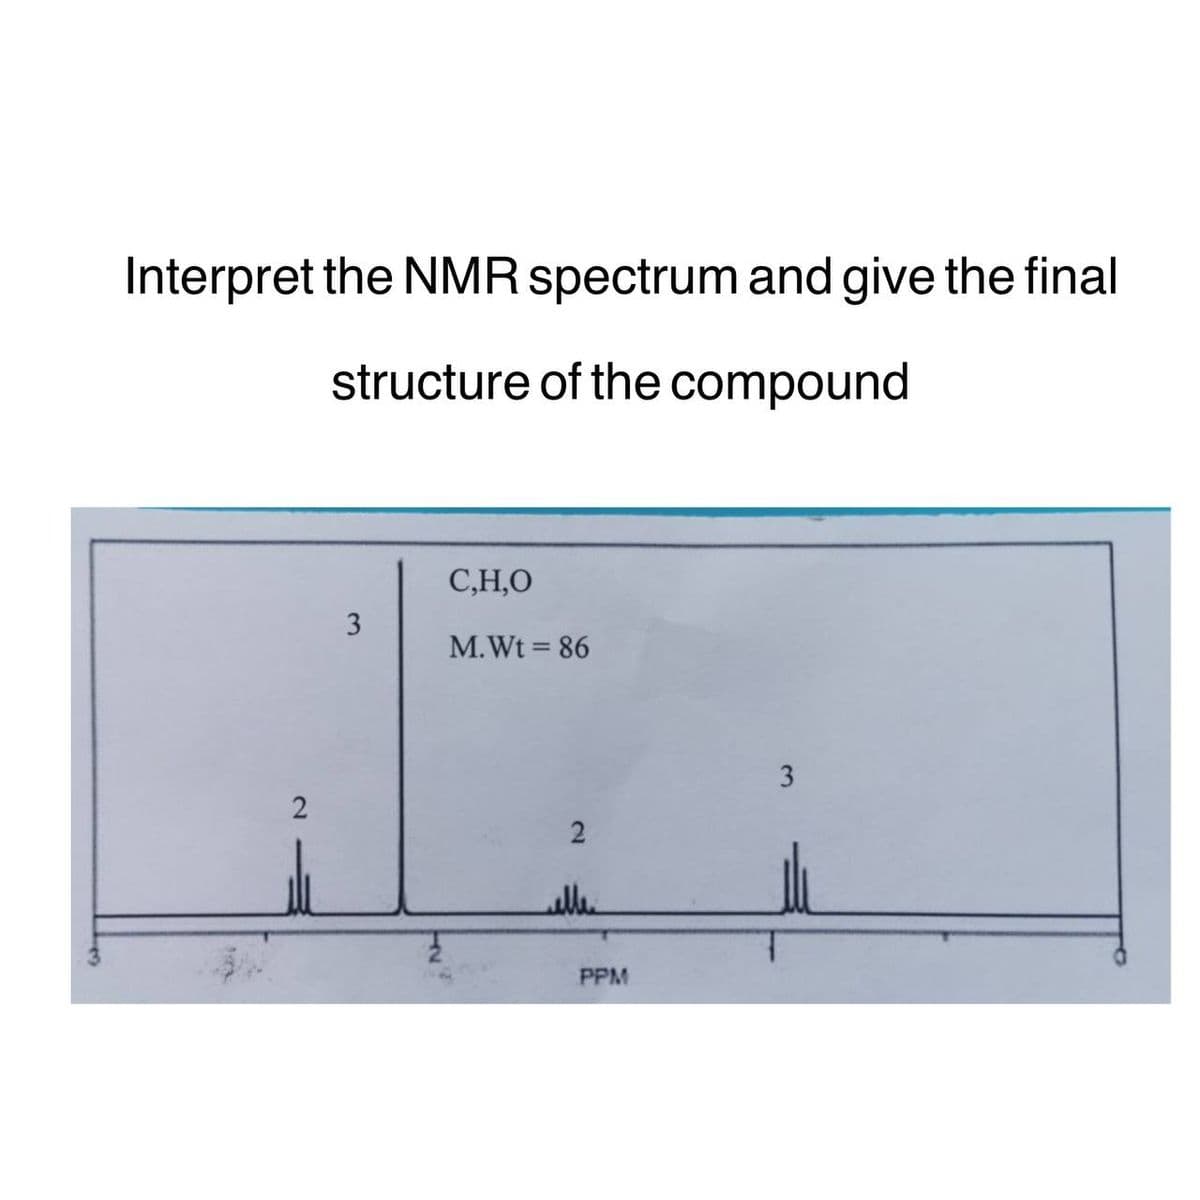 Interpret the NMR spectrum and give the final
structure of the compound
2
3
C,H,O
M. Wt = 86
2
eller
PPM
3